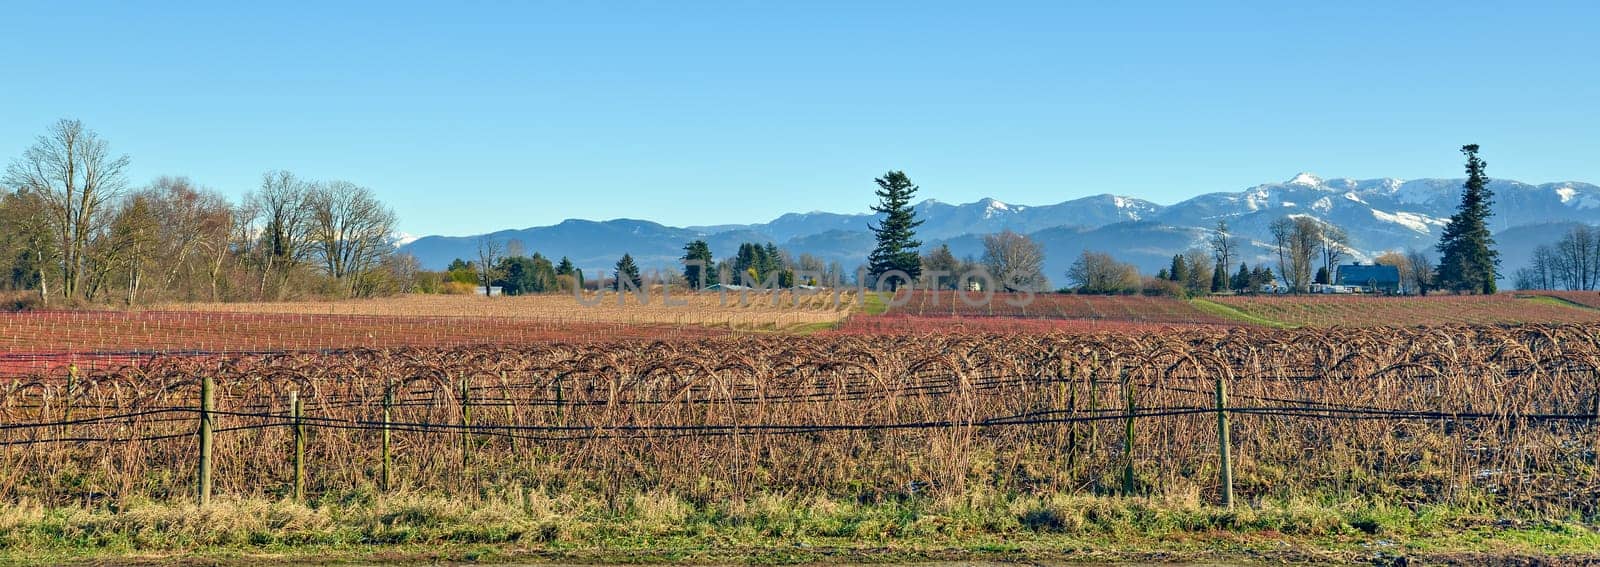 Bluberry farm with mountain view on winter season in the Fraser valley by Imagenet